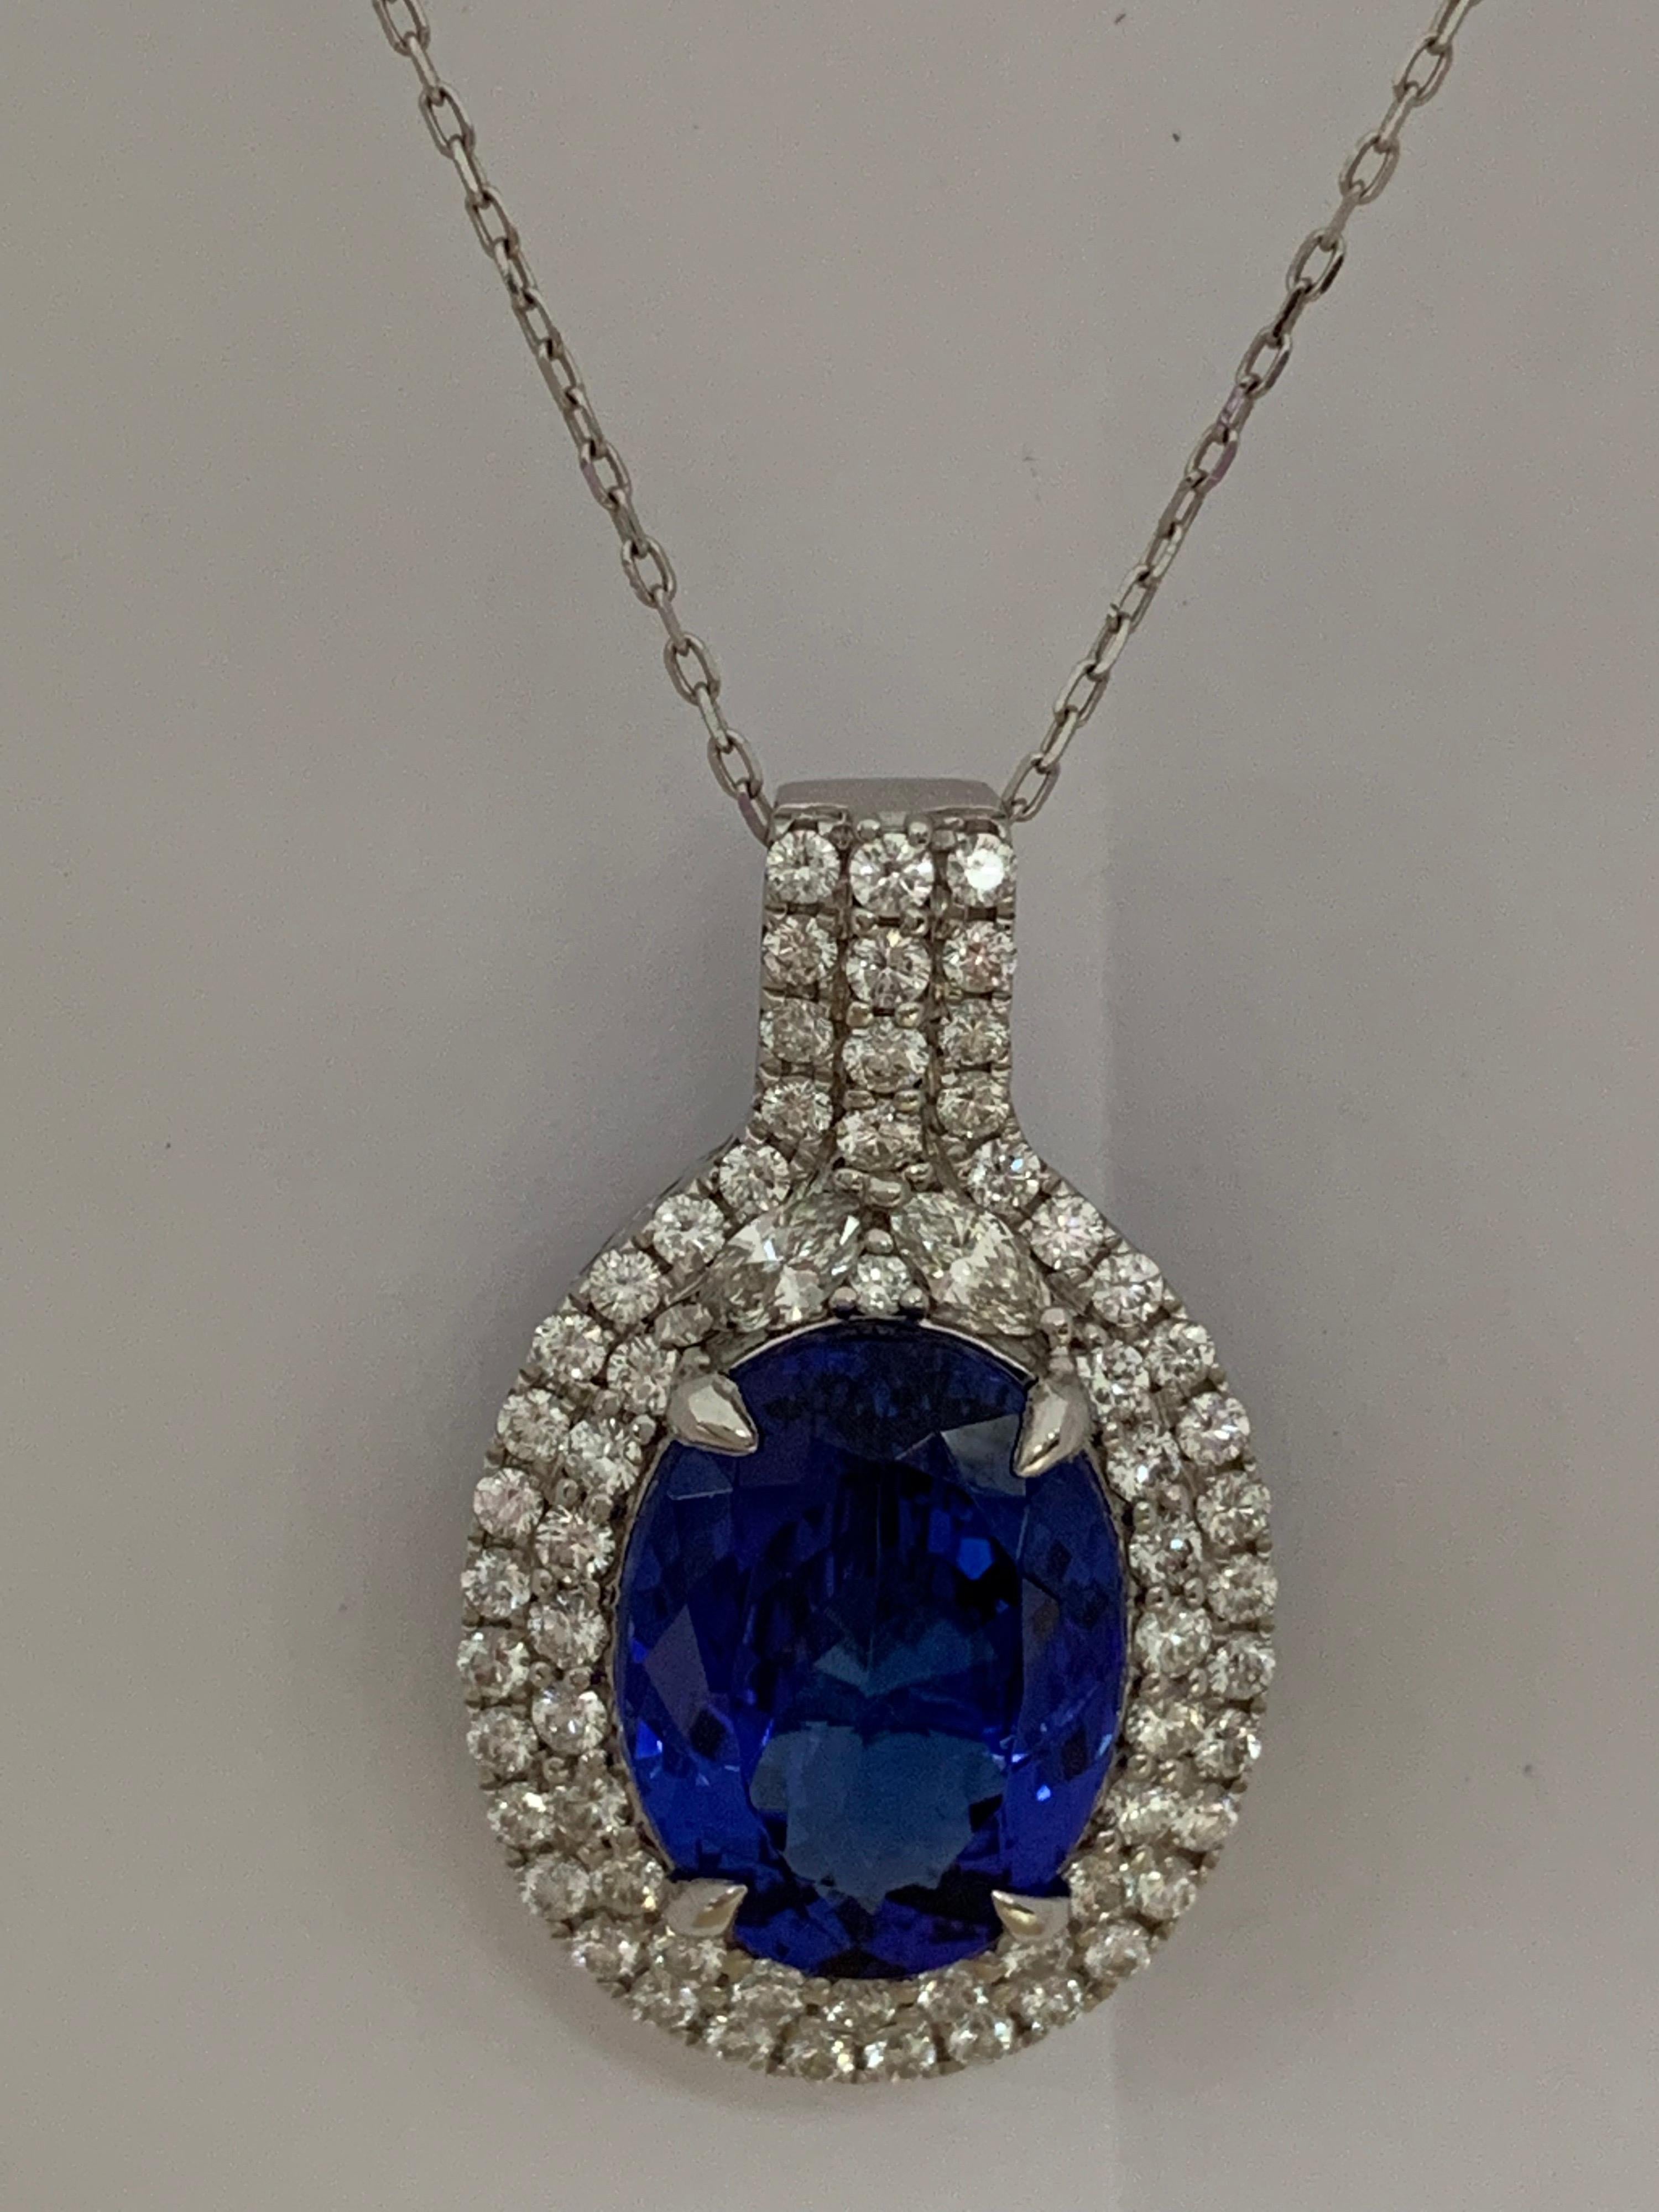 Natural AAA quality 9.51 Carat Oval Tanzanite and 1.56 Carat white diamond set in 14 Karat gold is one of a kind handcrafted Pendant. The pendant include 18 Karat white gold.